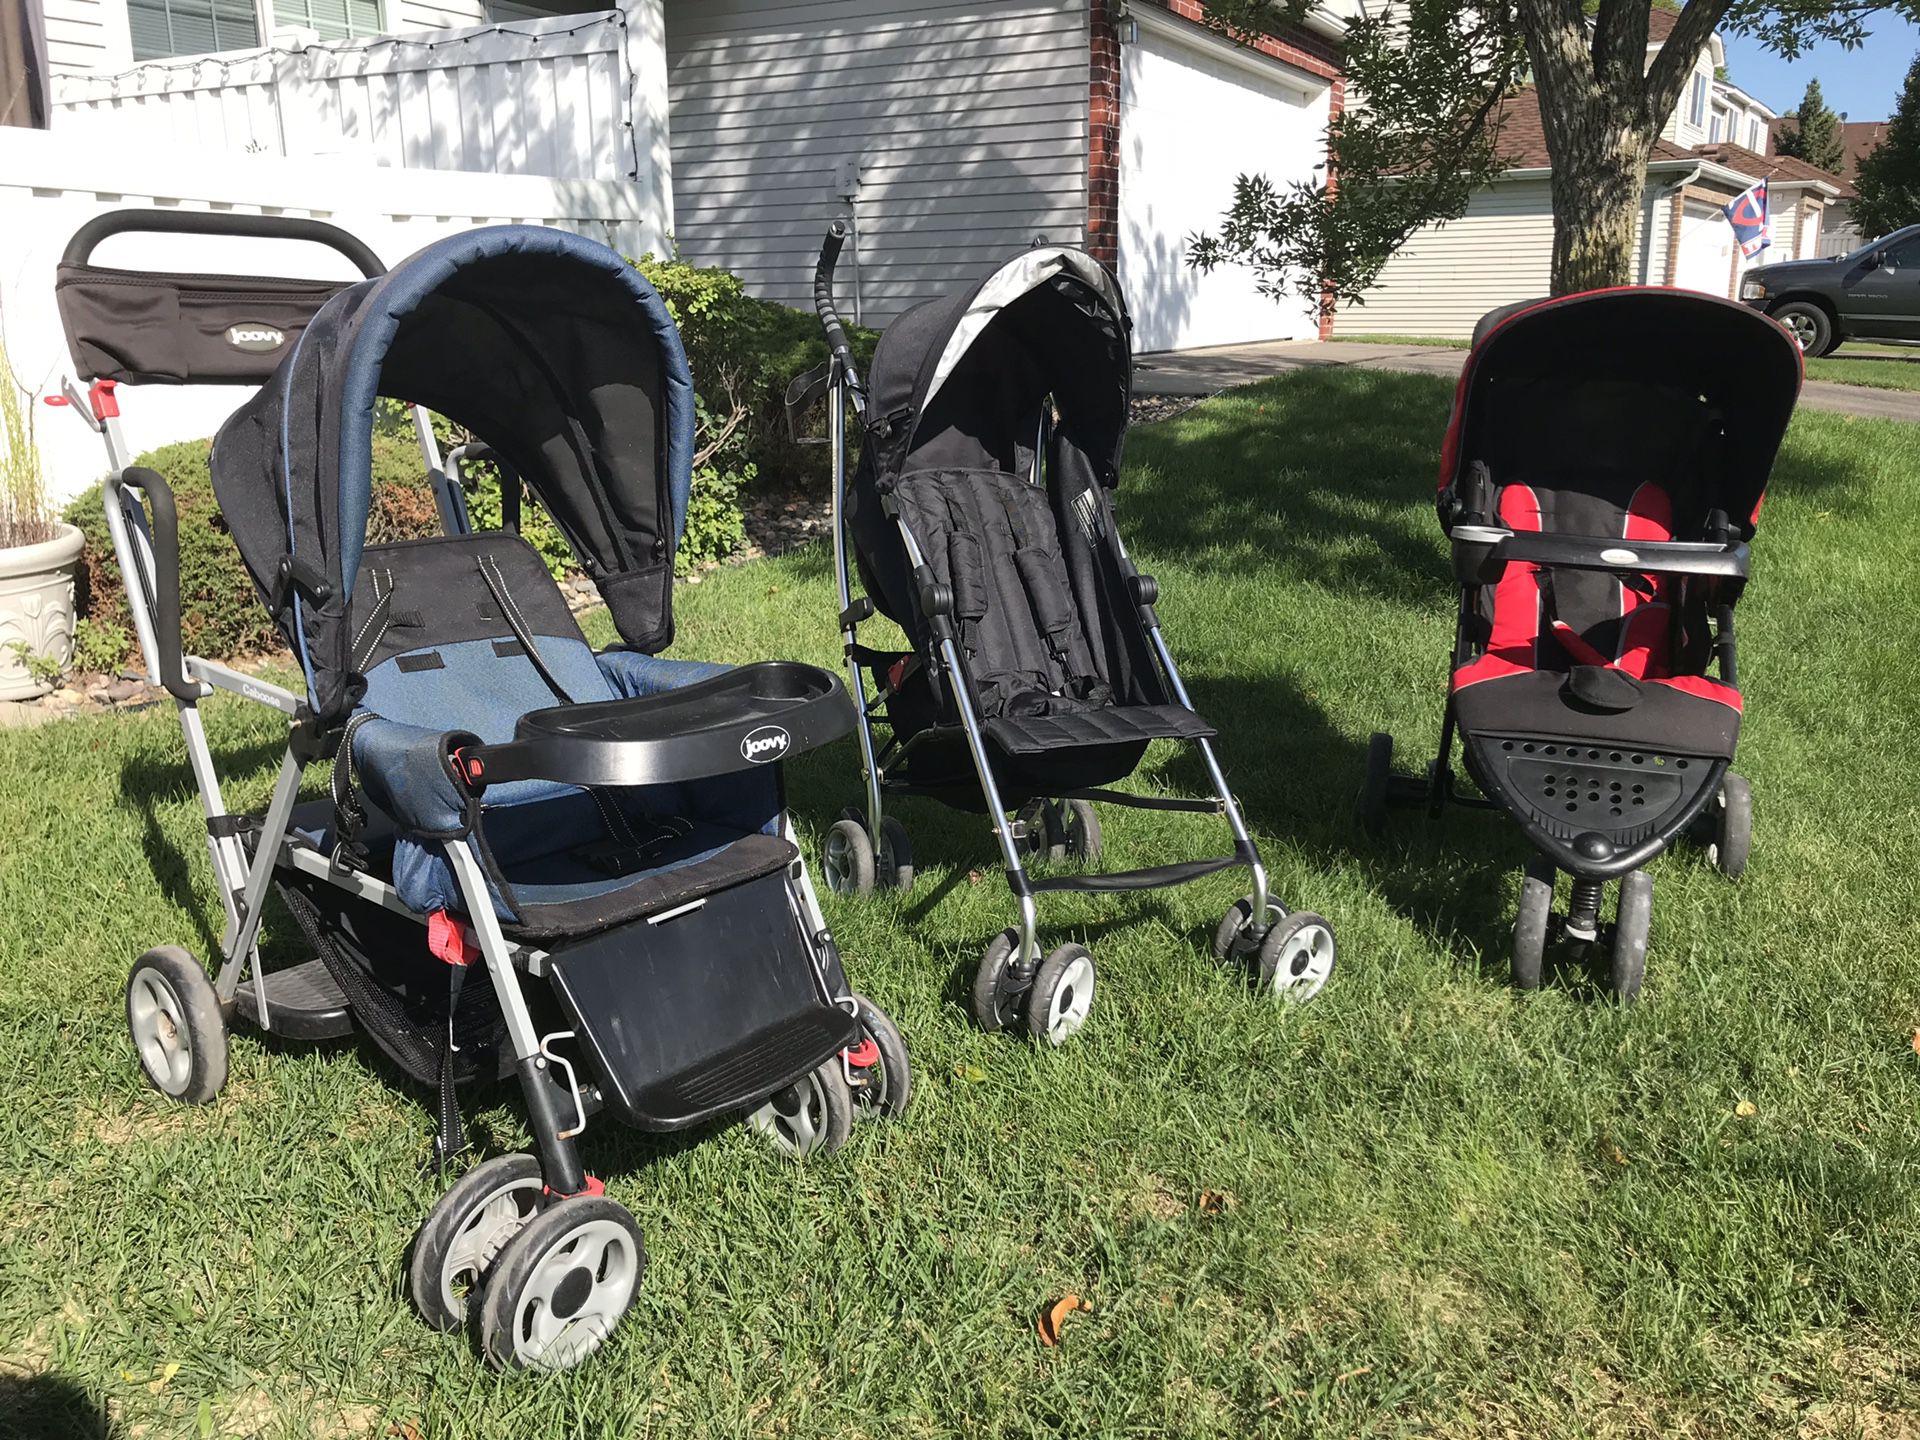 3 strollers (umbrella, jogging, sit and stand double) $10 each